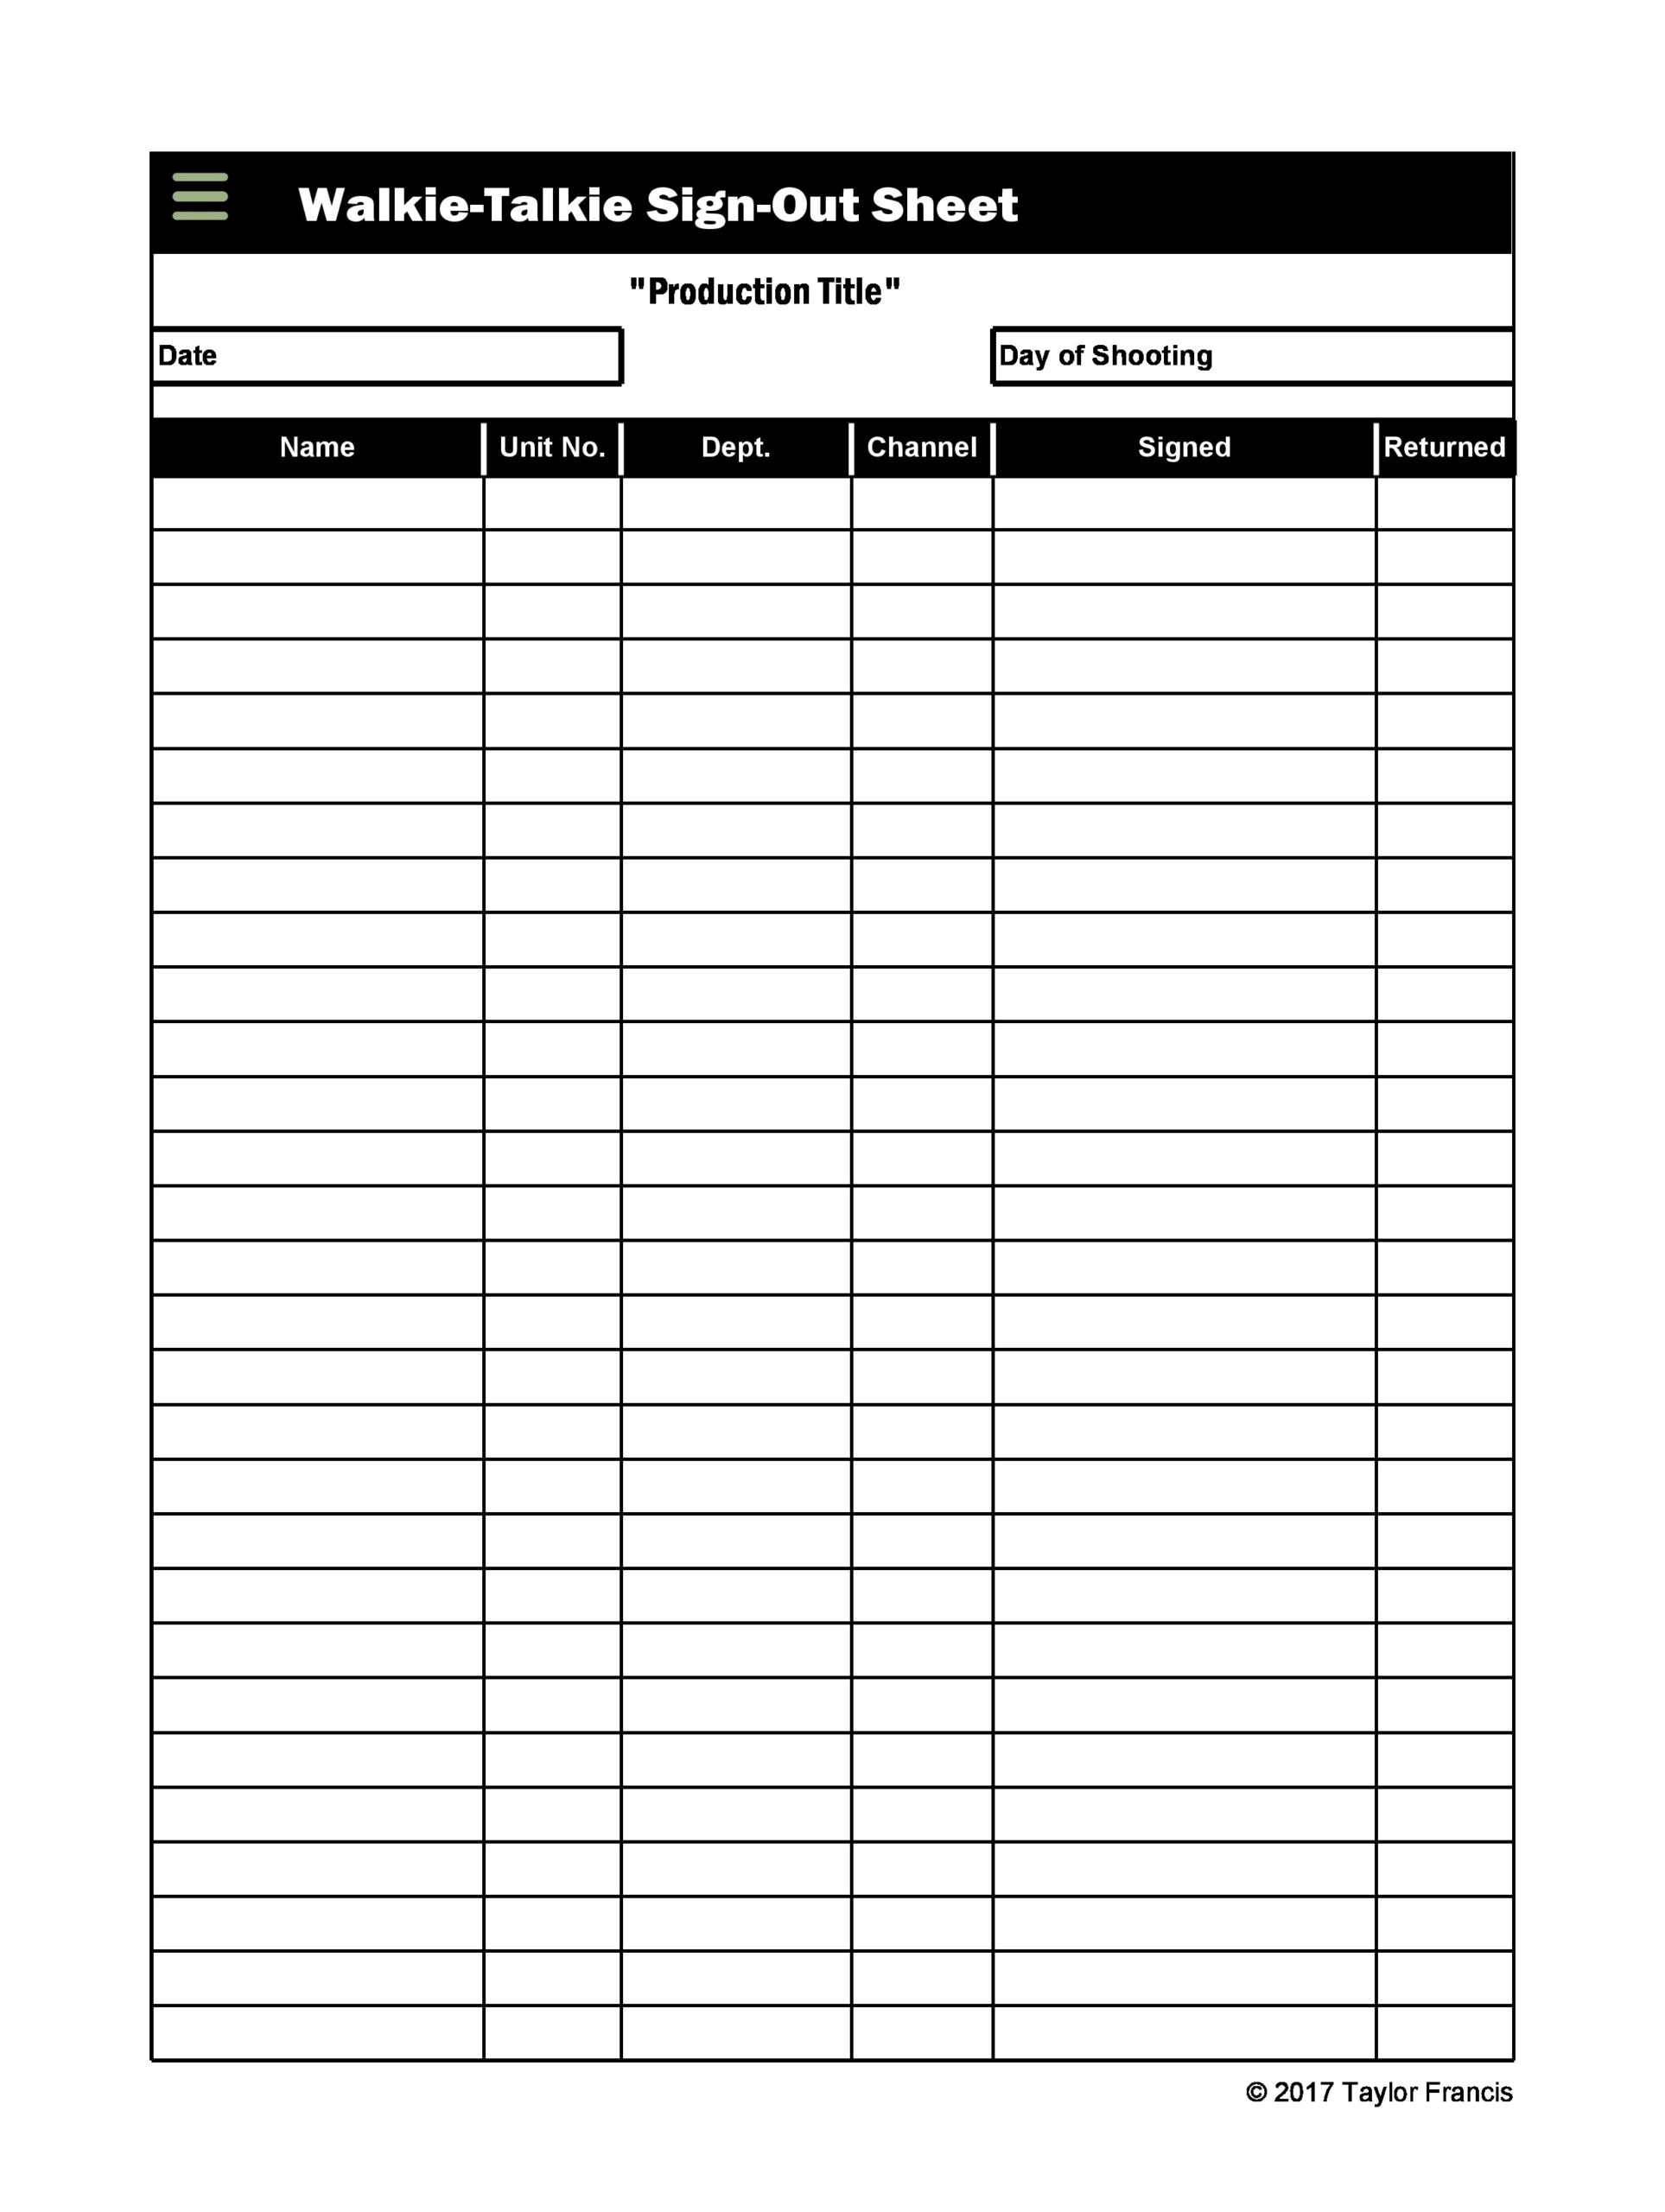 Email Opt In Sign Up Sheet Google Search Sign In Sheet Template Templates Sign In Sheet